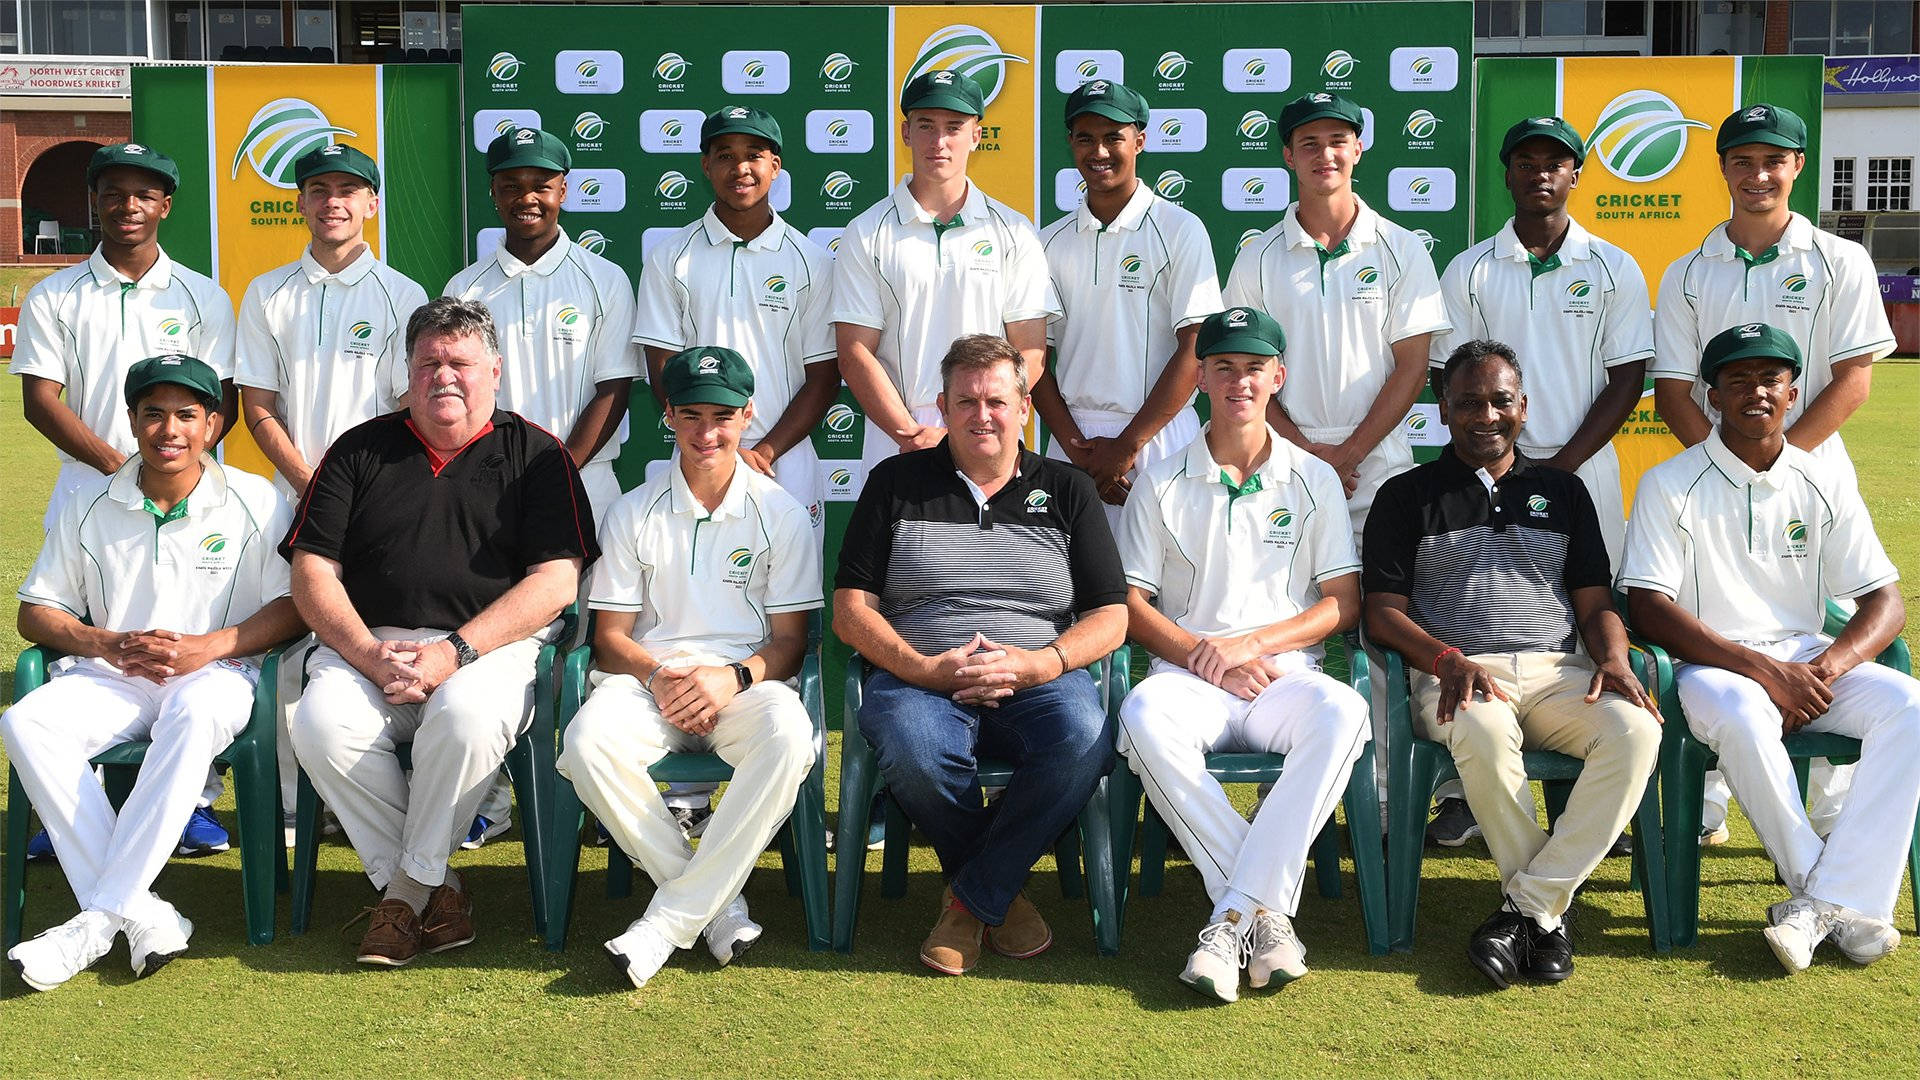 South Africa Cricket Team Background